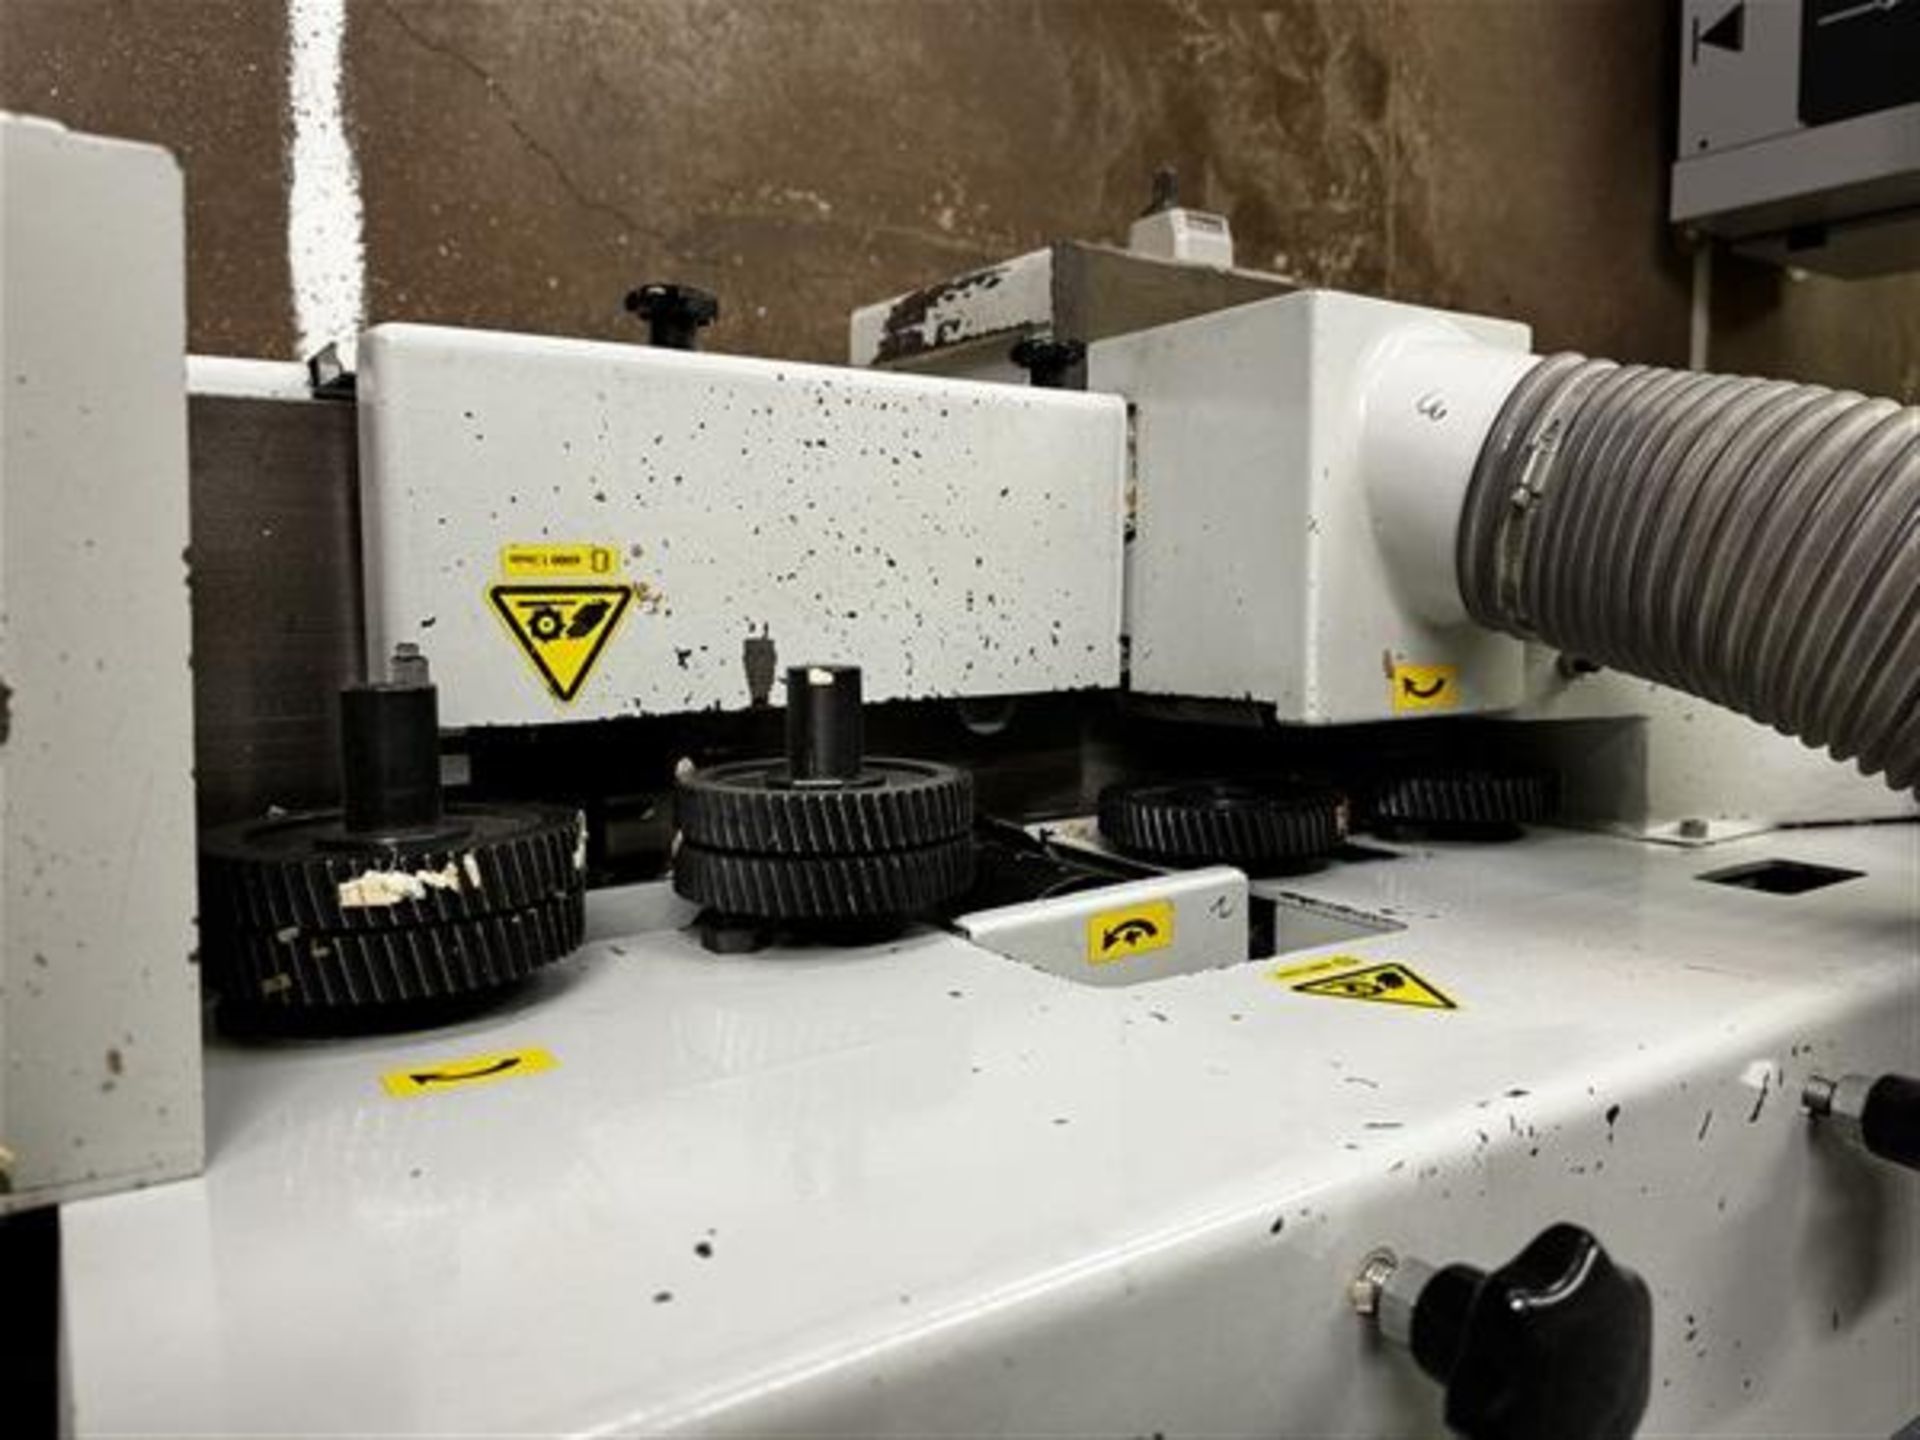 Holtech 4 sided through feed moulder (2004), type Compact 18, serial no. 4255 03, power 400v - Image 6 of 9